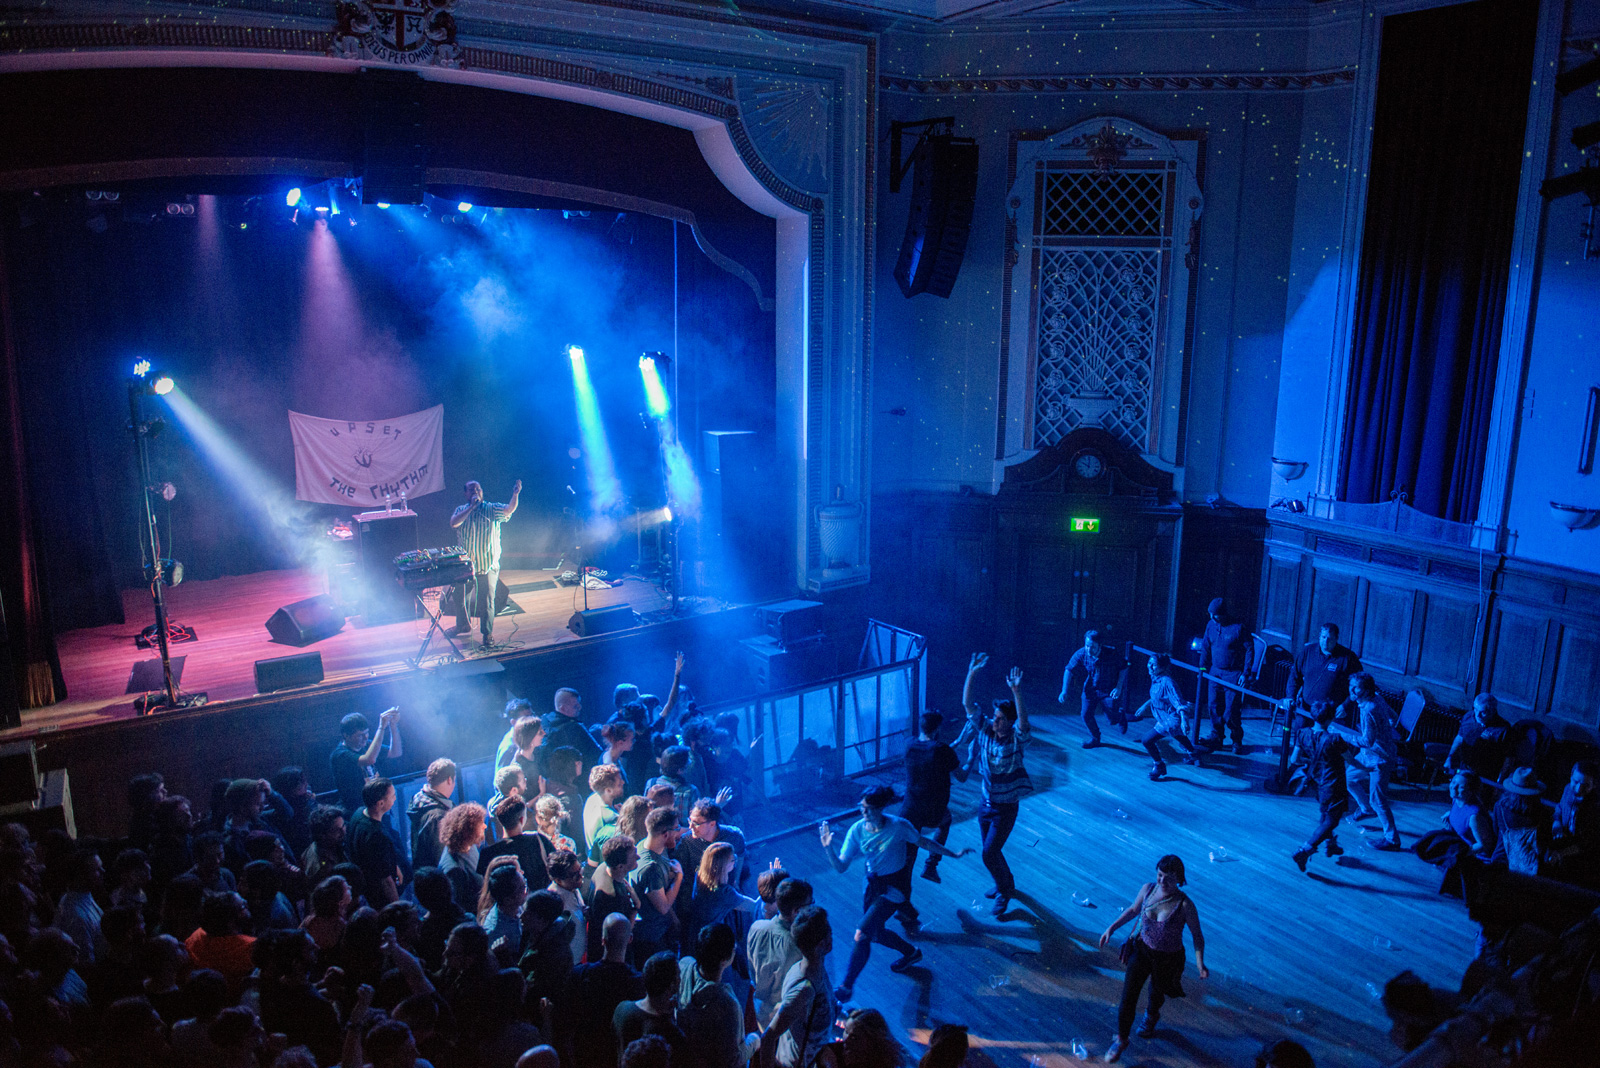 Dan Deacon performing at Islington Assembly Hall in February 2015. Photography Gaelle Beri